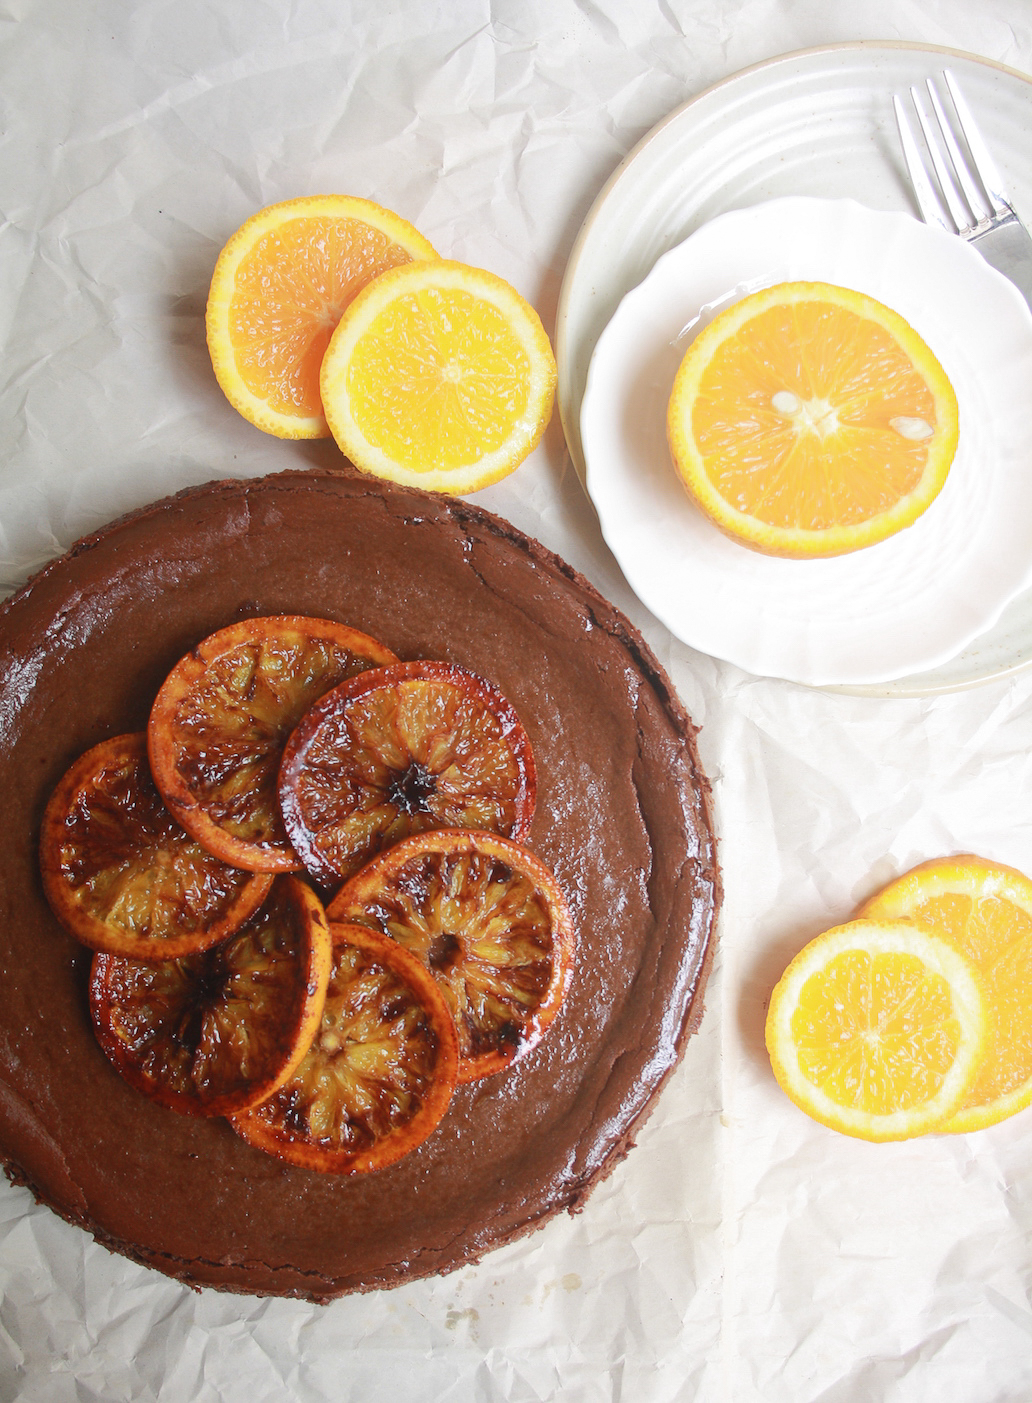 Dark, creamy, chocolate cheesecake spiked with fresh orange juice topped with caramelised orange slices. Rich and perfect!